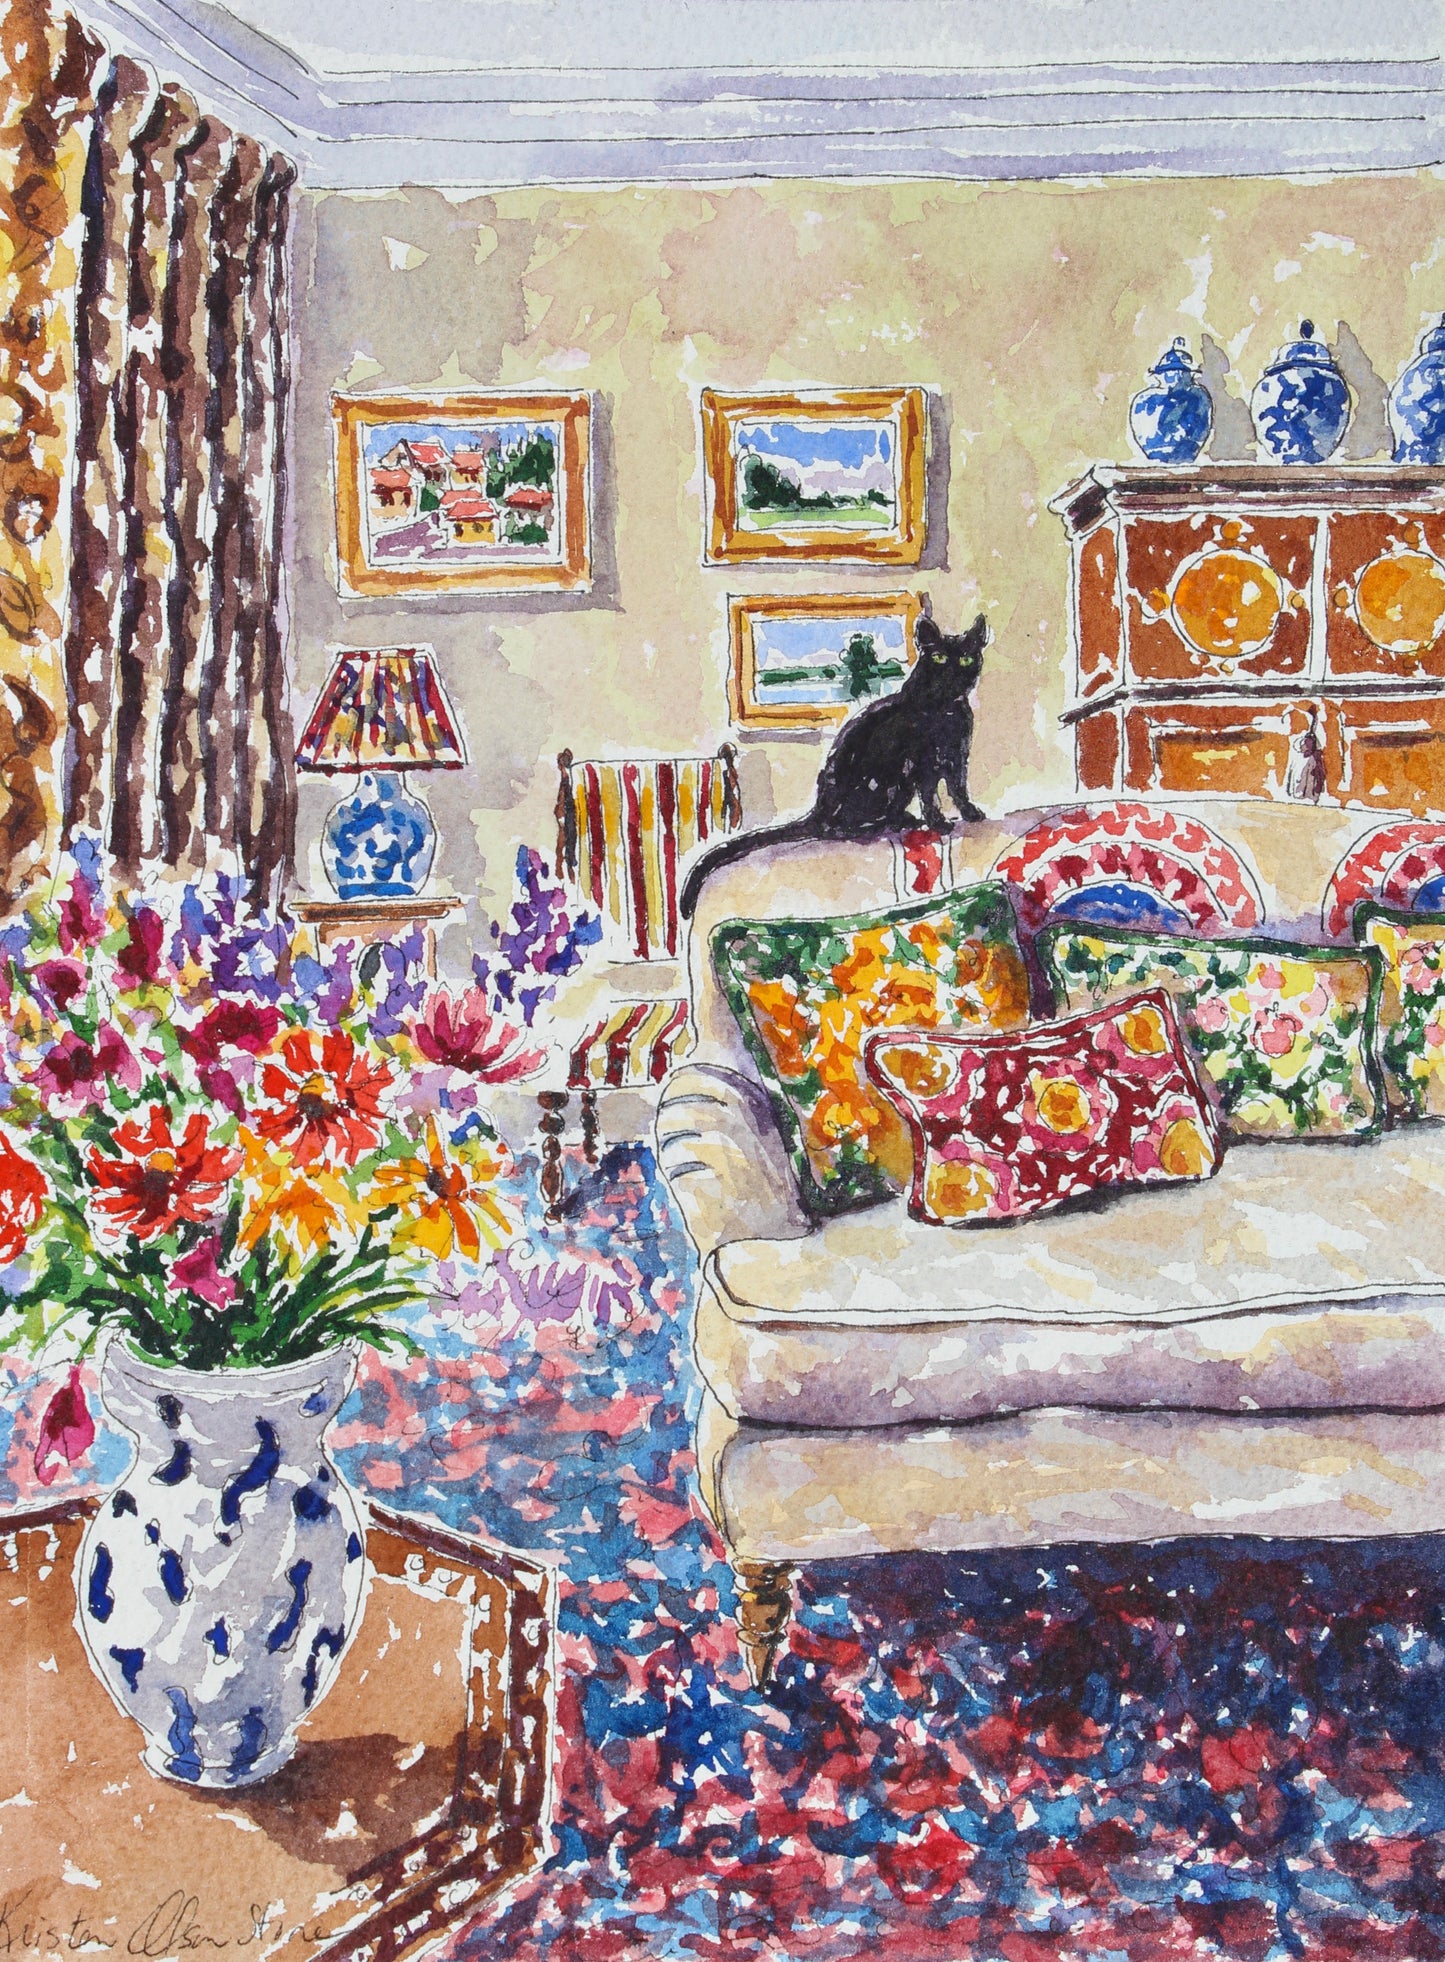 Chinoise Dreams, An Original 9" x 12" Watercolor And Ink Painting Of A Luxurious Room Scene With A Black Cat